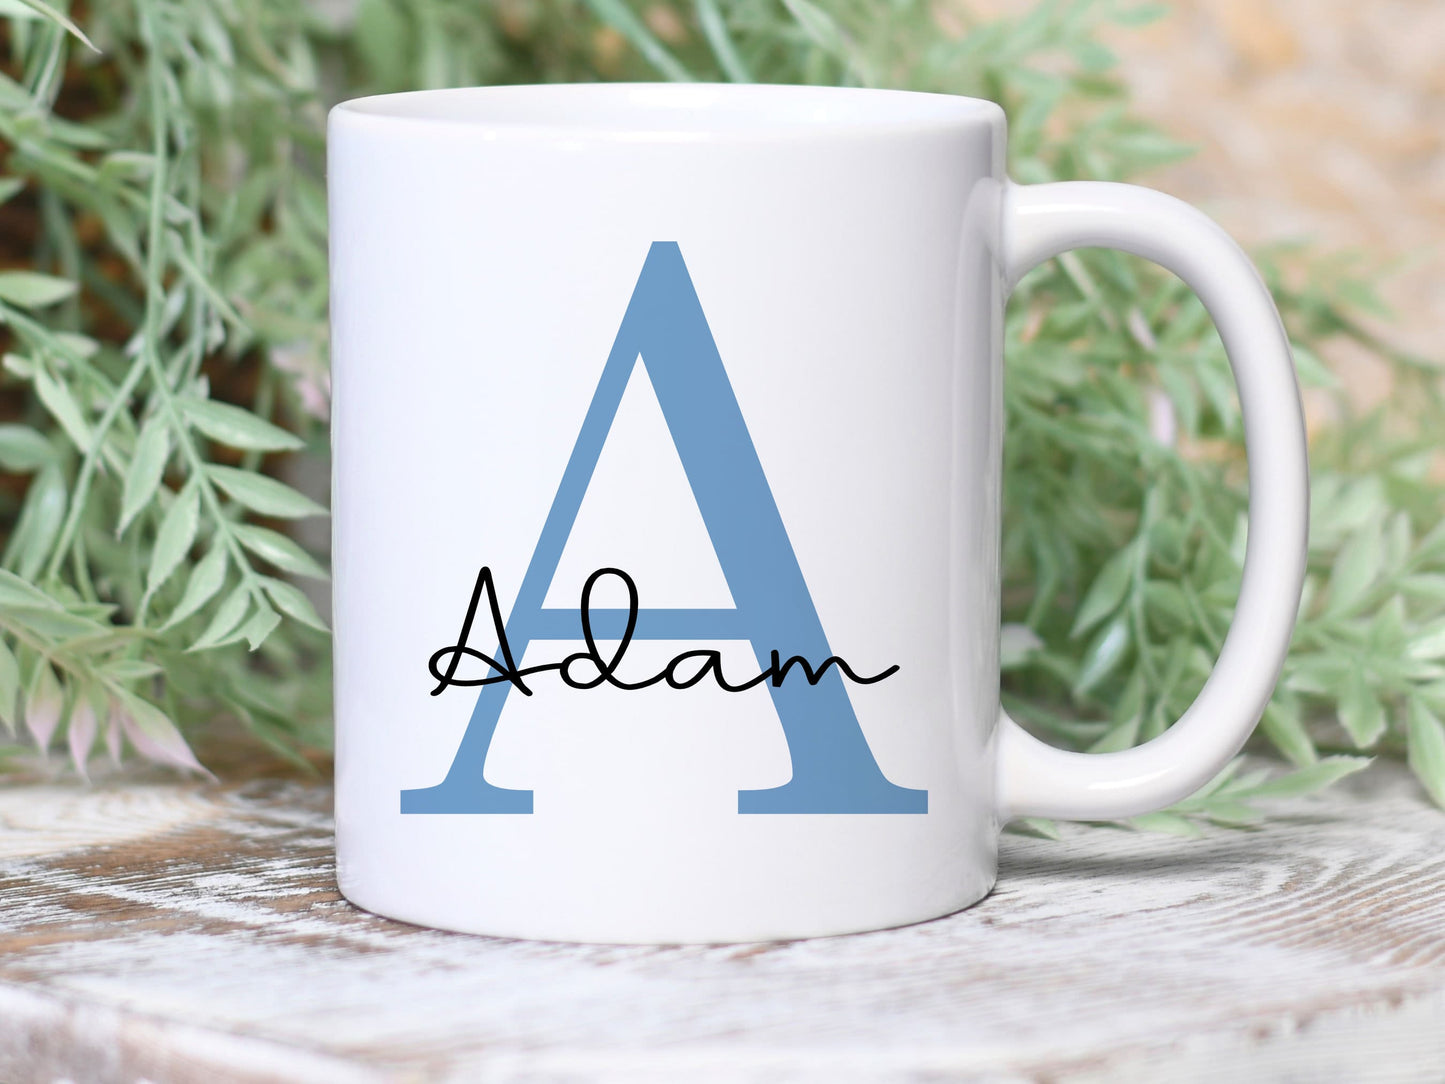 white mug with greenery behind. The mug has a large blue letter A printed with the name Adam over the top in a black script font